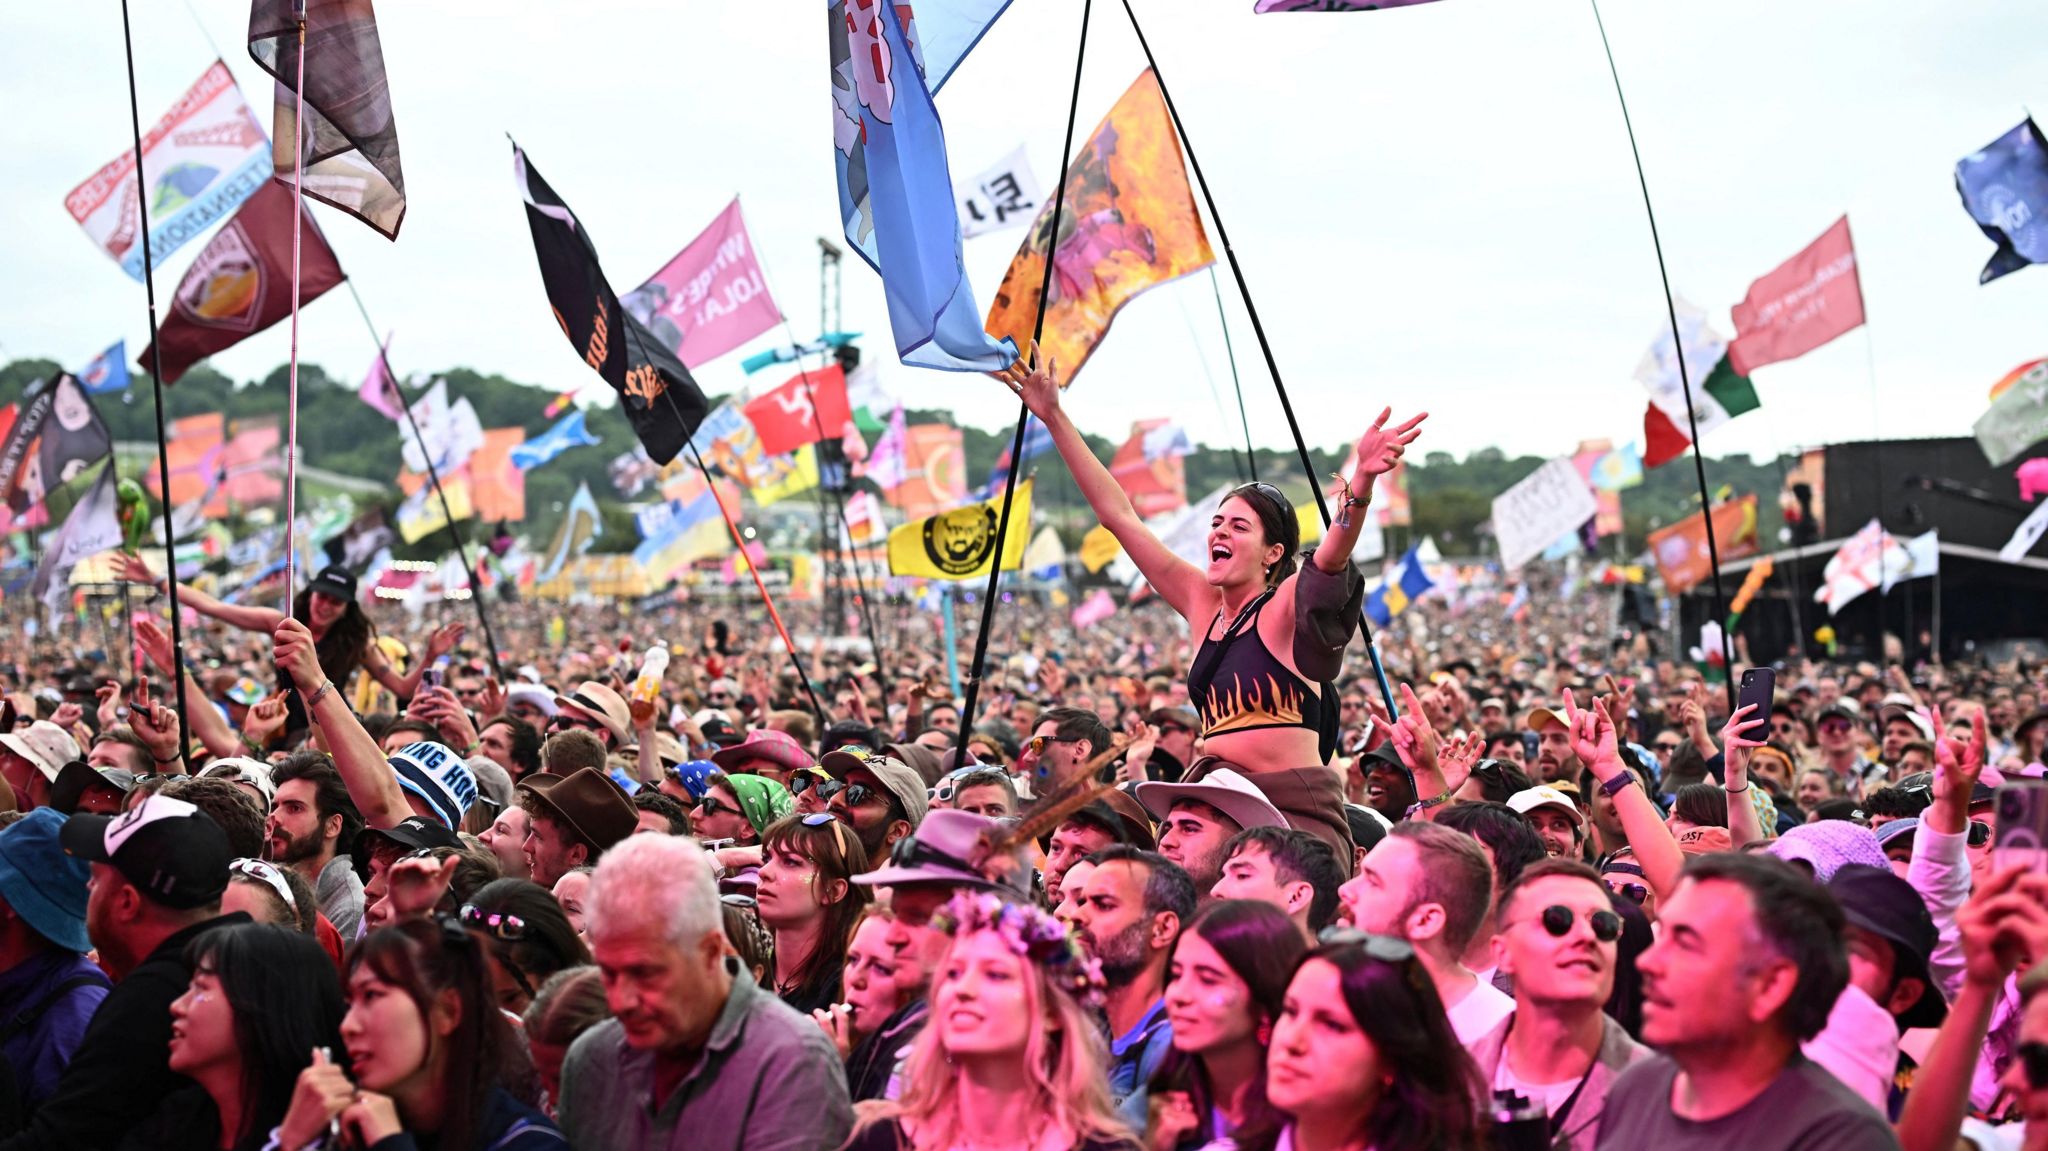 Image of the crowd at Glastonbury Festival. Flags can be seen, as well as one woman sat on somebody's shoulders with her hands in the air 